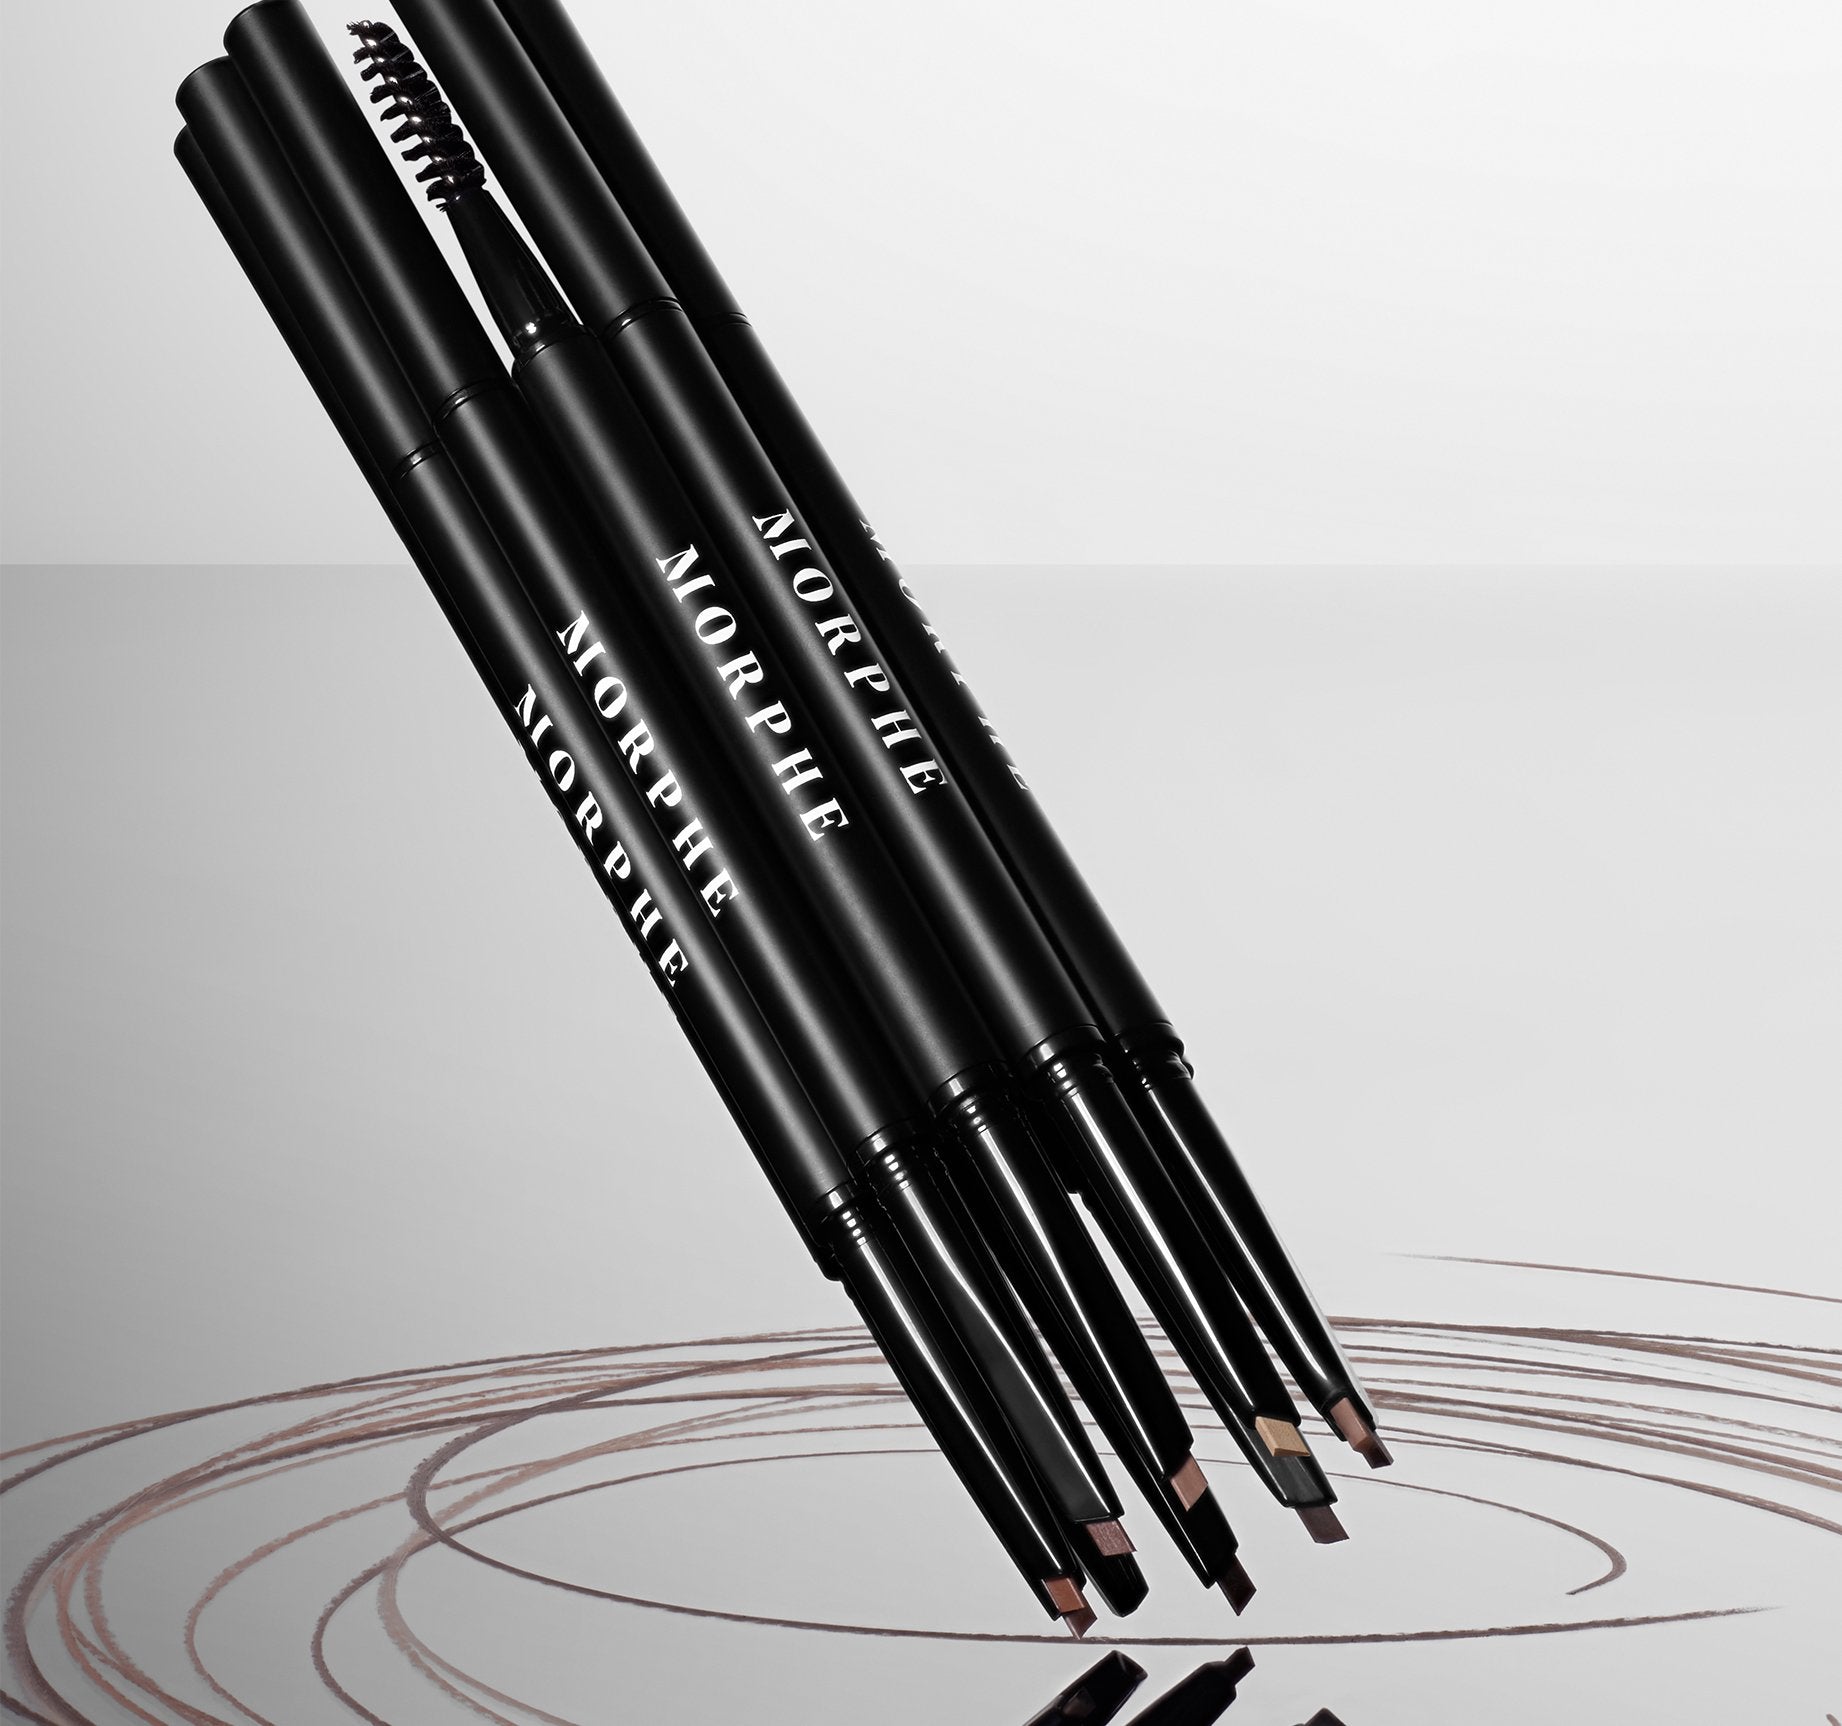 Definer Dual-Ended Brow Pencil & Spoolie - Biscotti - Image 11